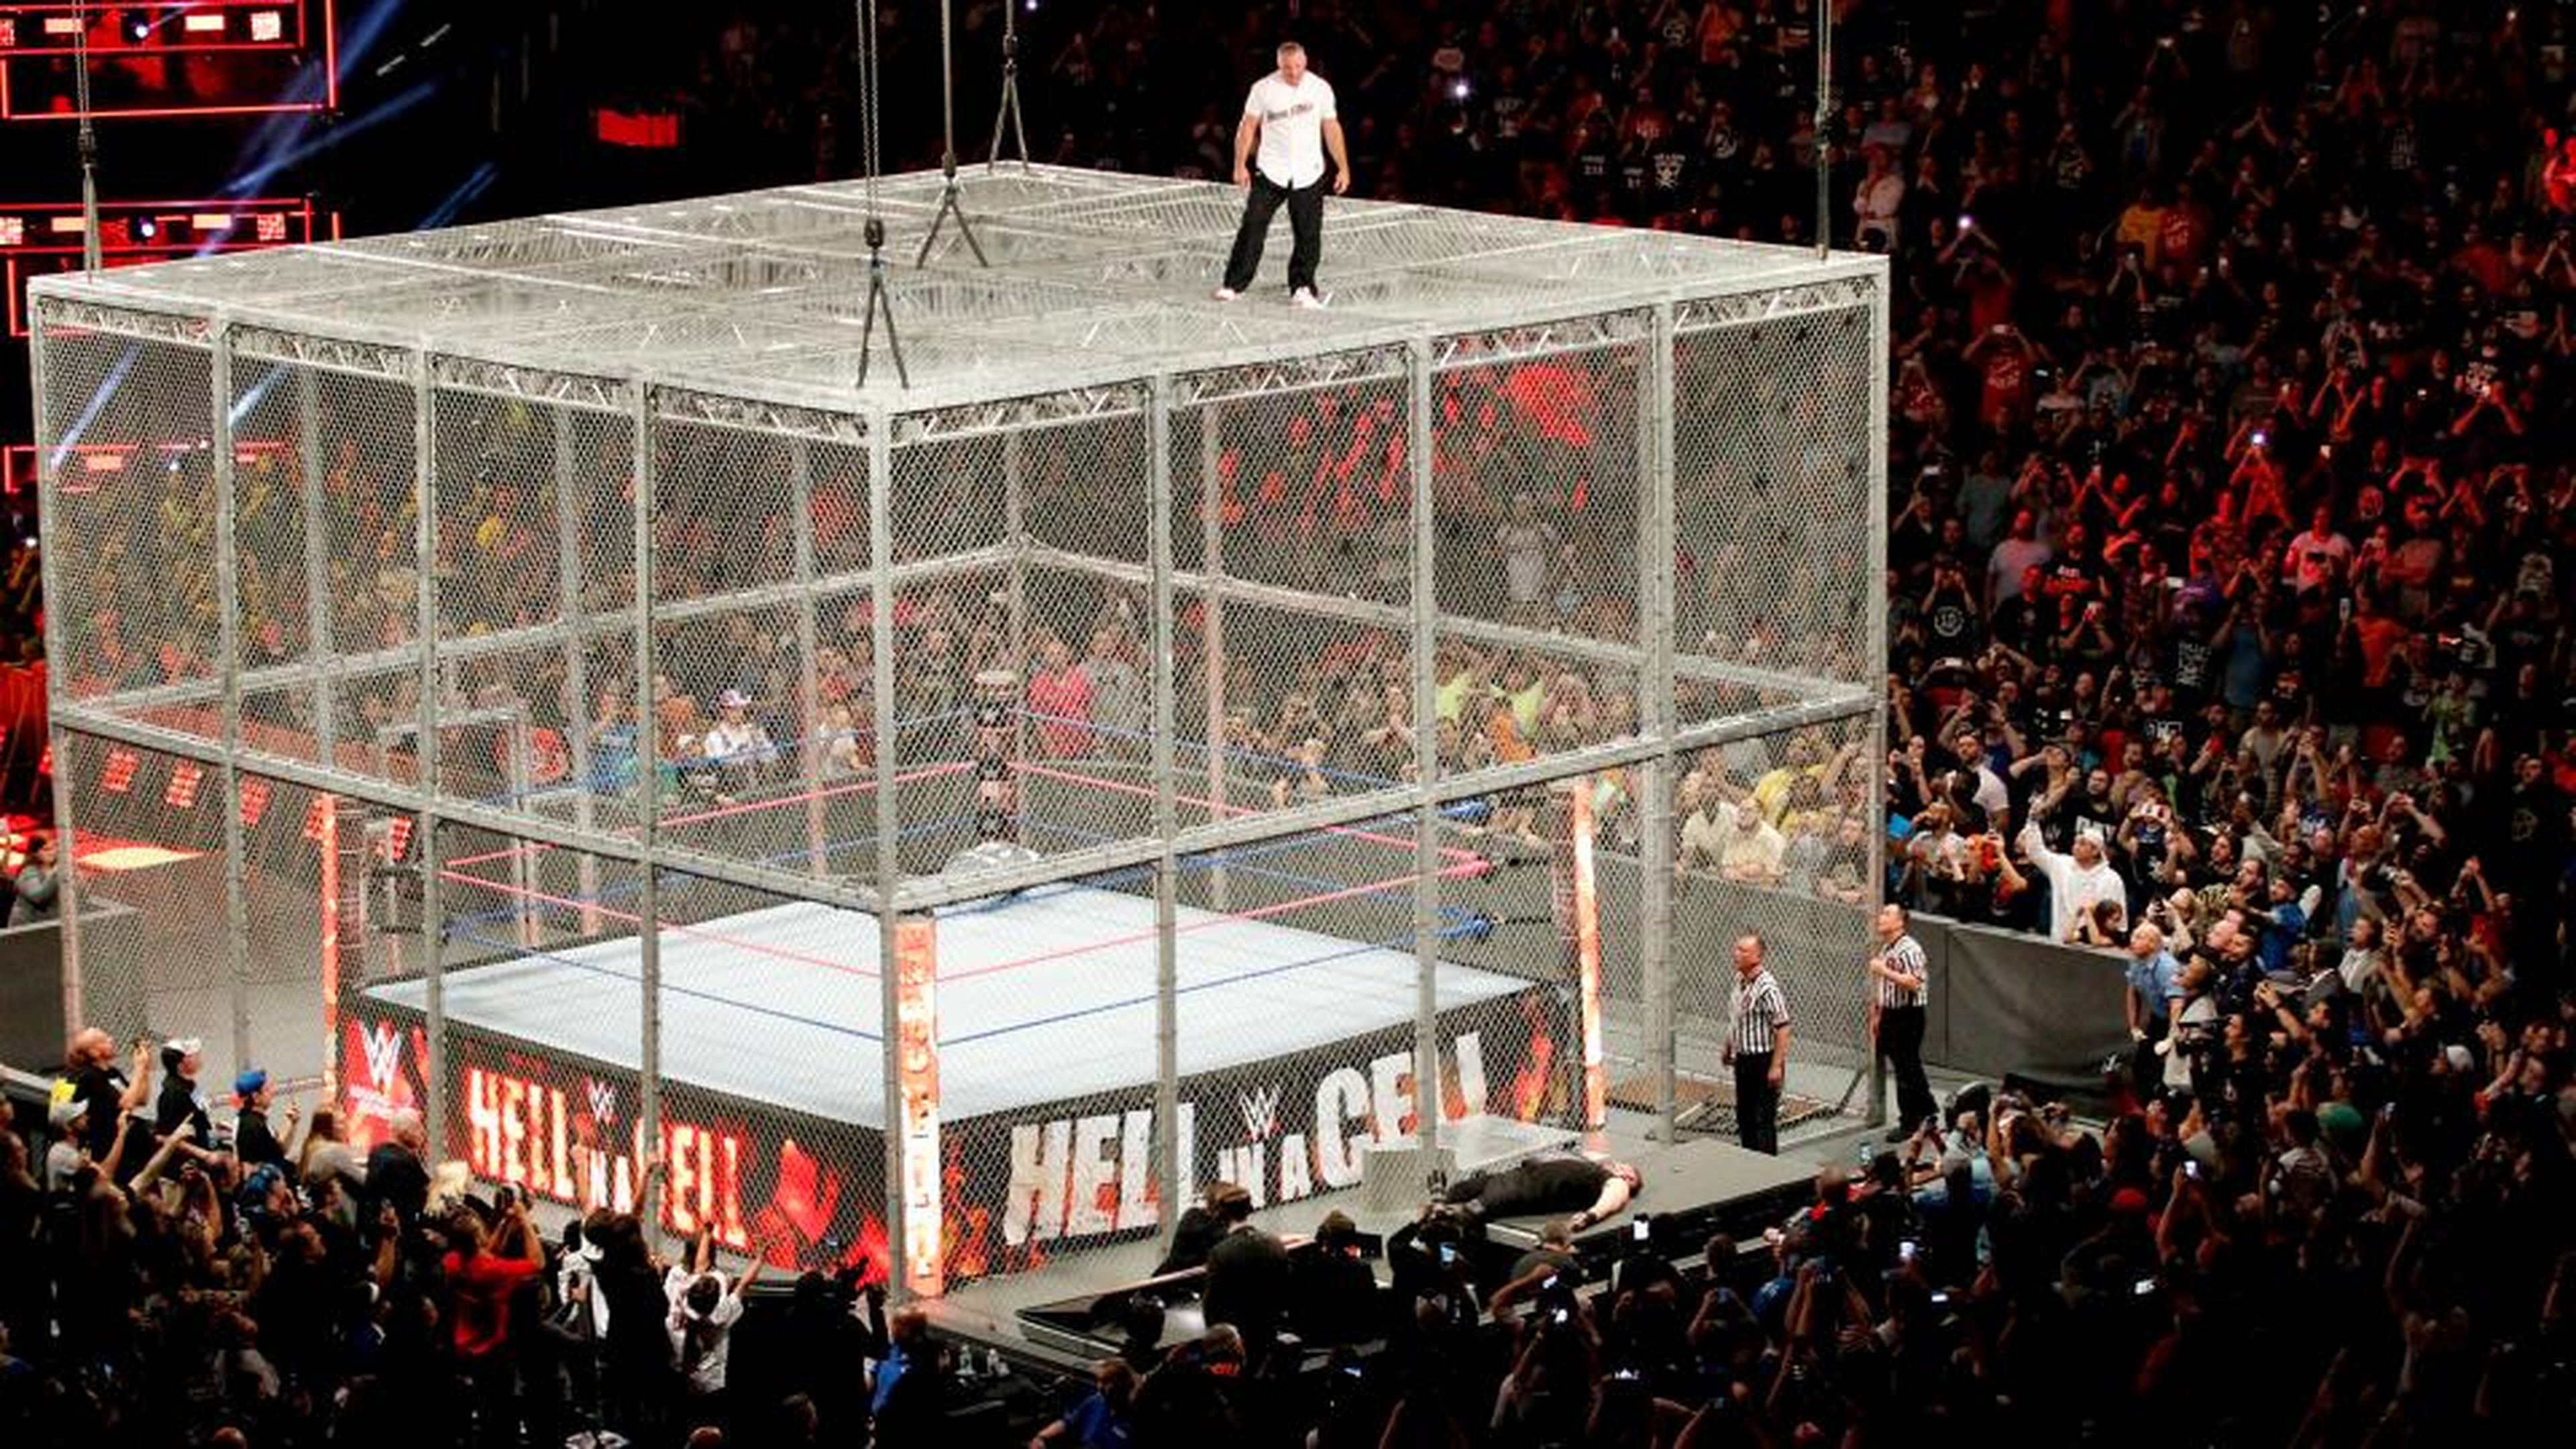 WWe Hell in a Cell 2017 - Kevin Owens vs. Shane McMahon